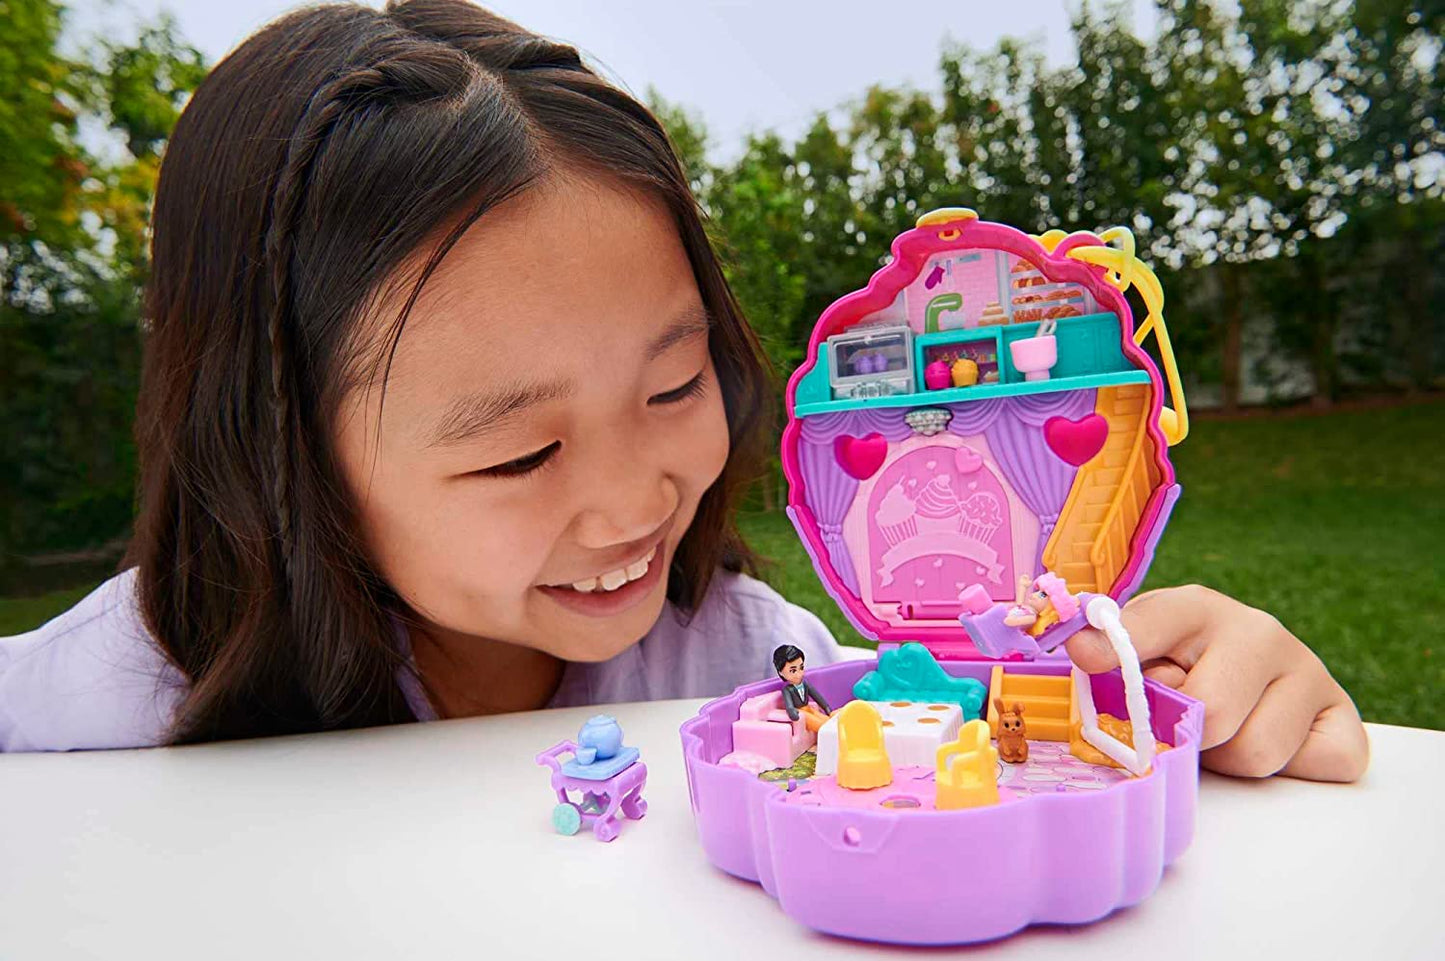 Polly Pocket Mini Toys, Something Sweet Cupcake Compact Playset with 2 Micro Dolls and 13 Accessories, Pocket World Travel Toys with Surprise Reveals